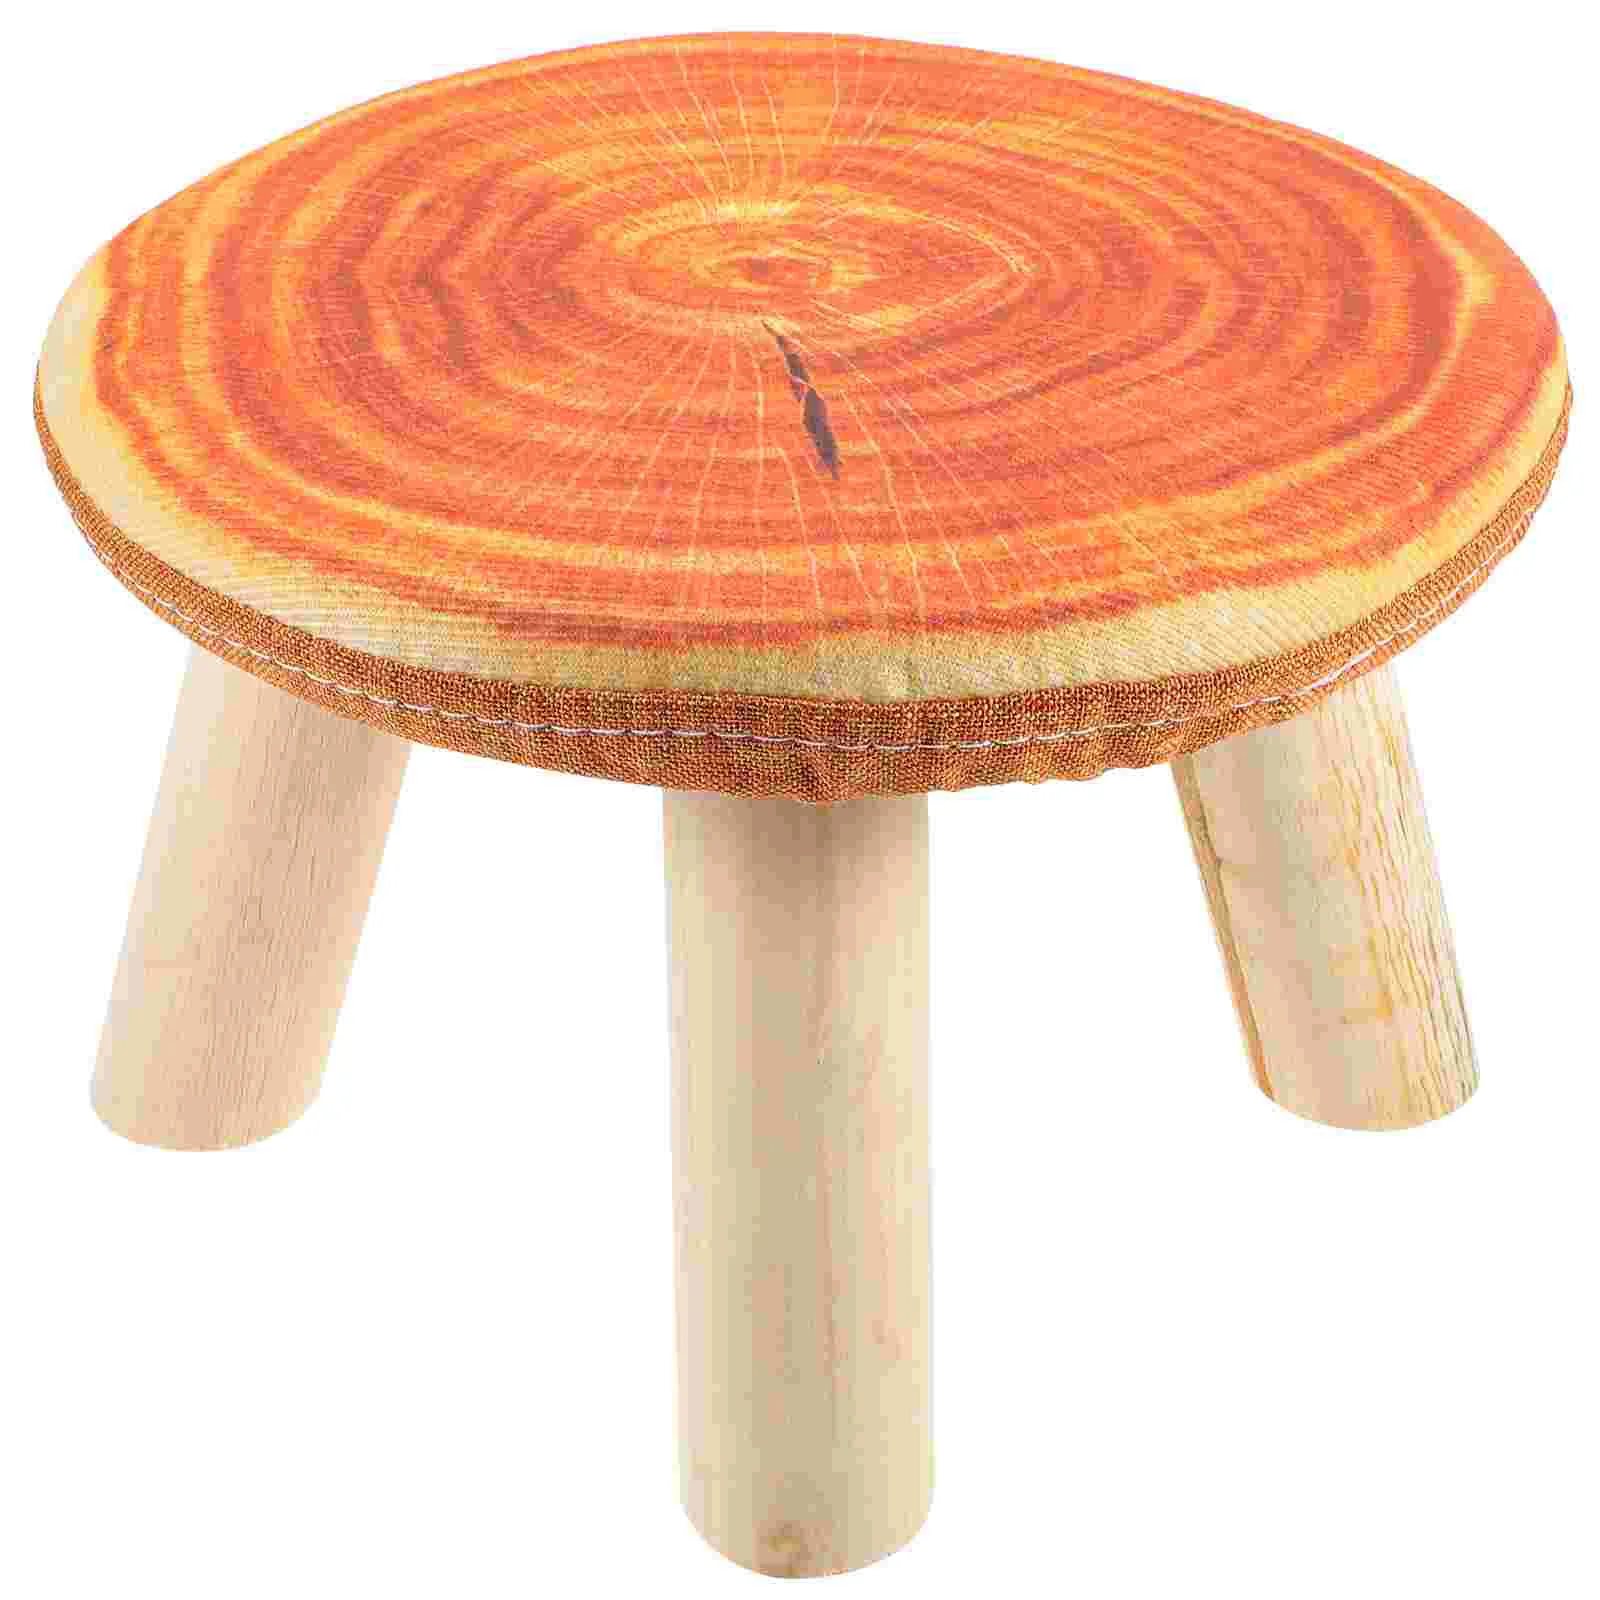 

Small Bench Round Stool Classroom Stools Kids Outdoor Chair Short Wood Chairs Toddler Stepping Mini Sitting Wooden